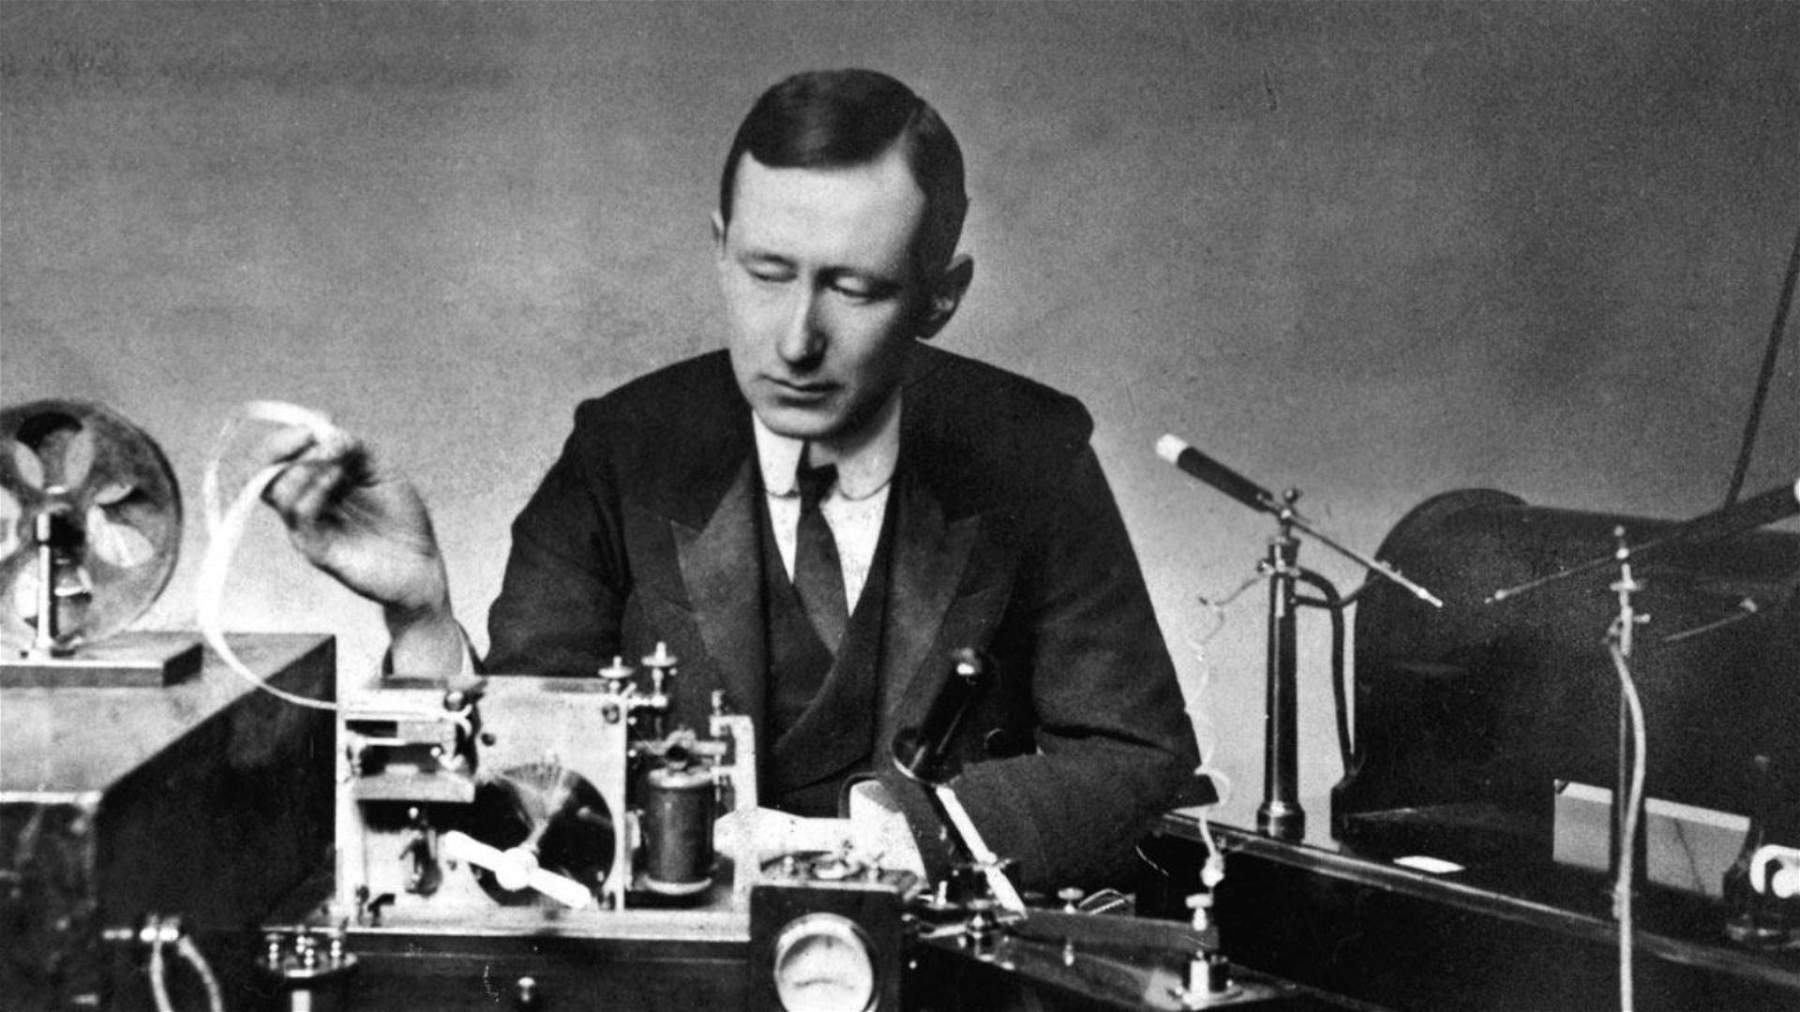 Cardiff wants to deny a monument to Guglielmo Marconi for his relations with fascism